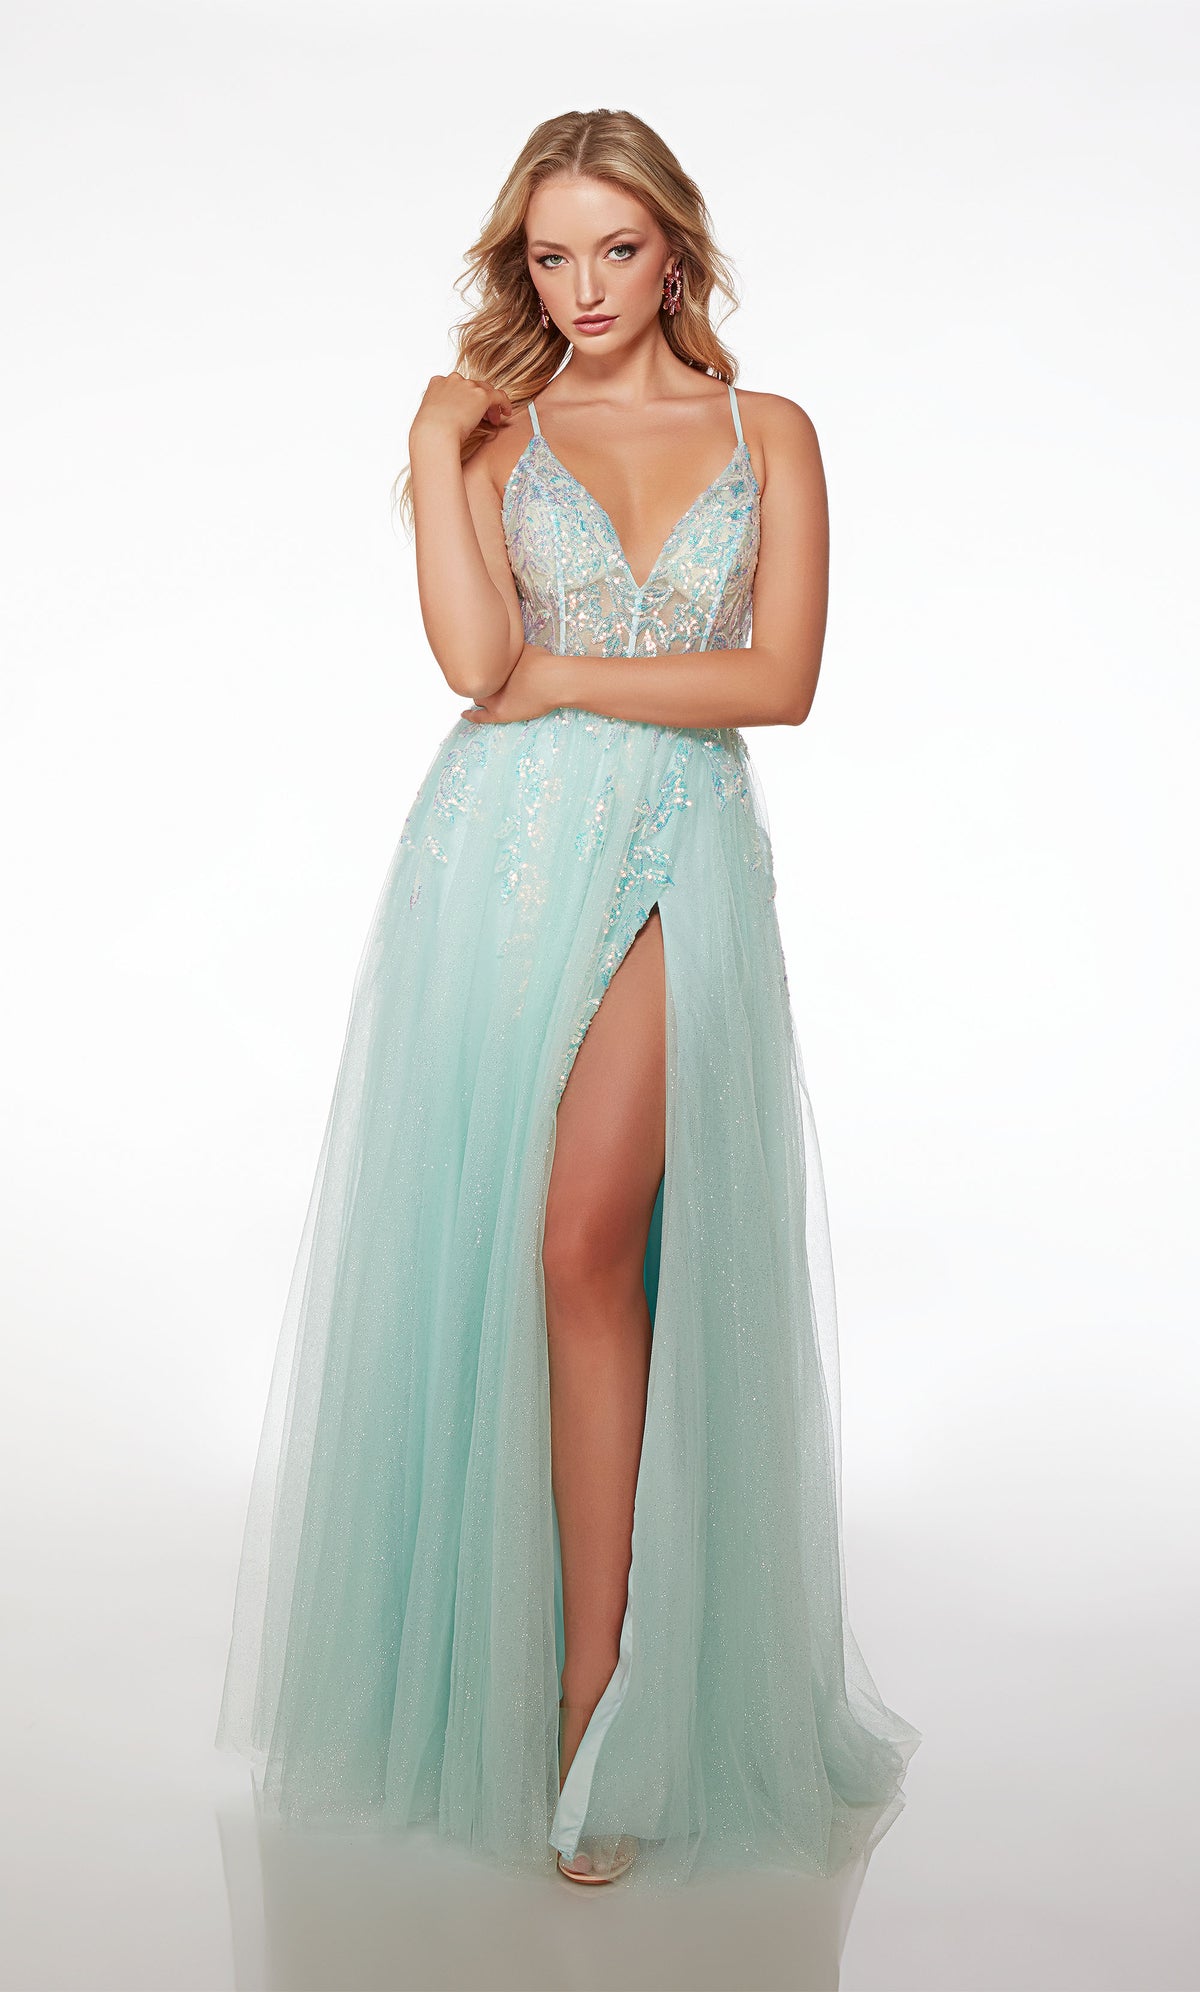 Blue prom dress: V neckline, sheer top with floral lace, high side slit, crisscross open back, in stunning glitter tulle fabric.